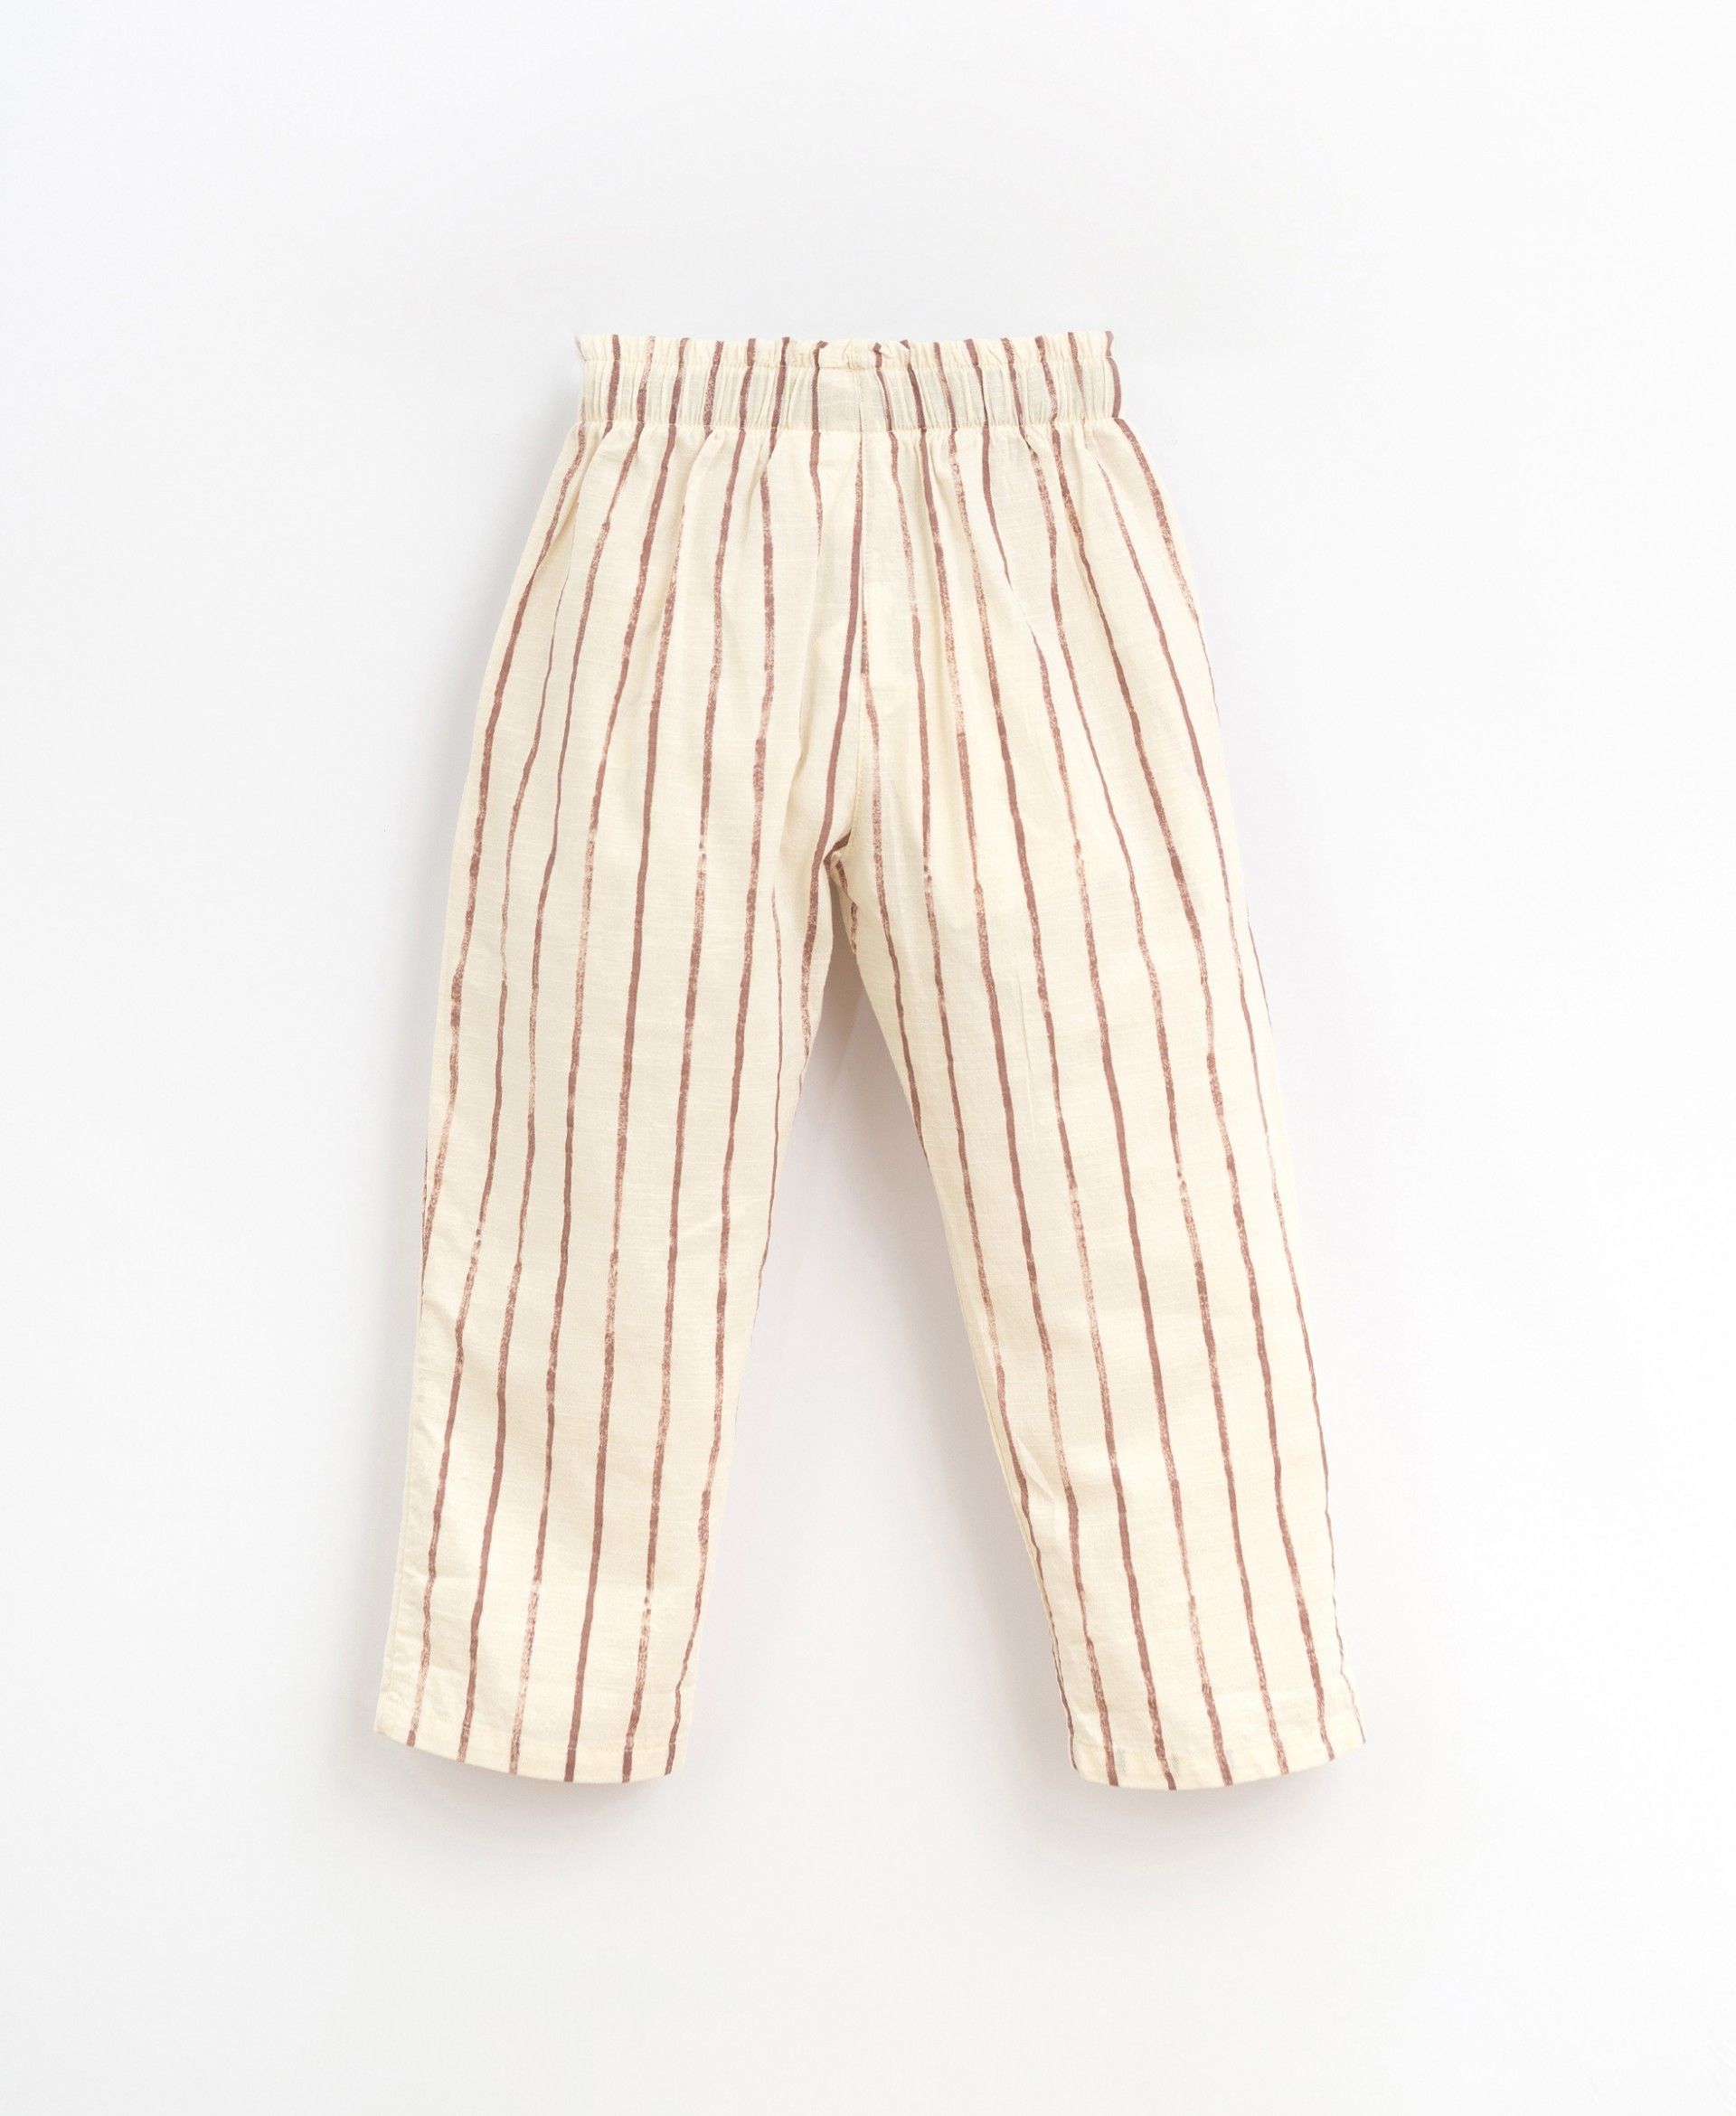 Striped pants with pockets | Basketry